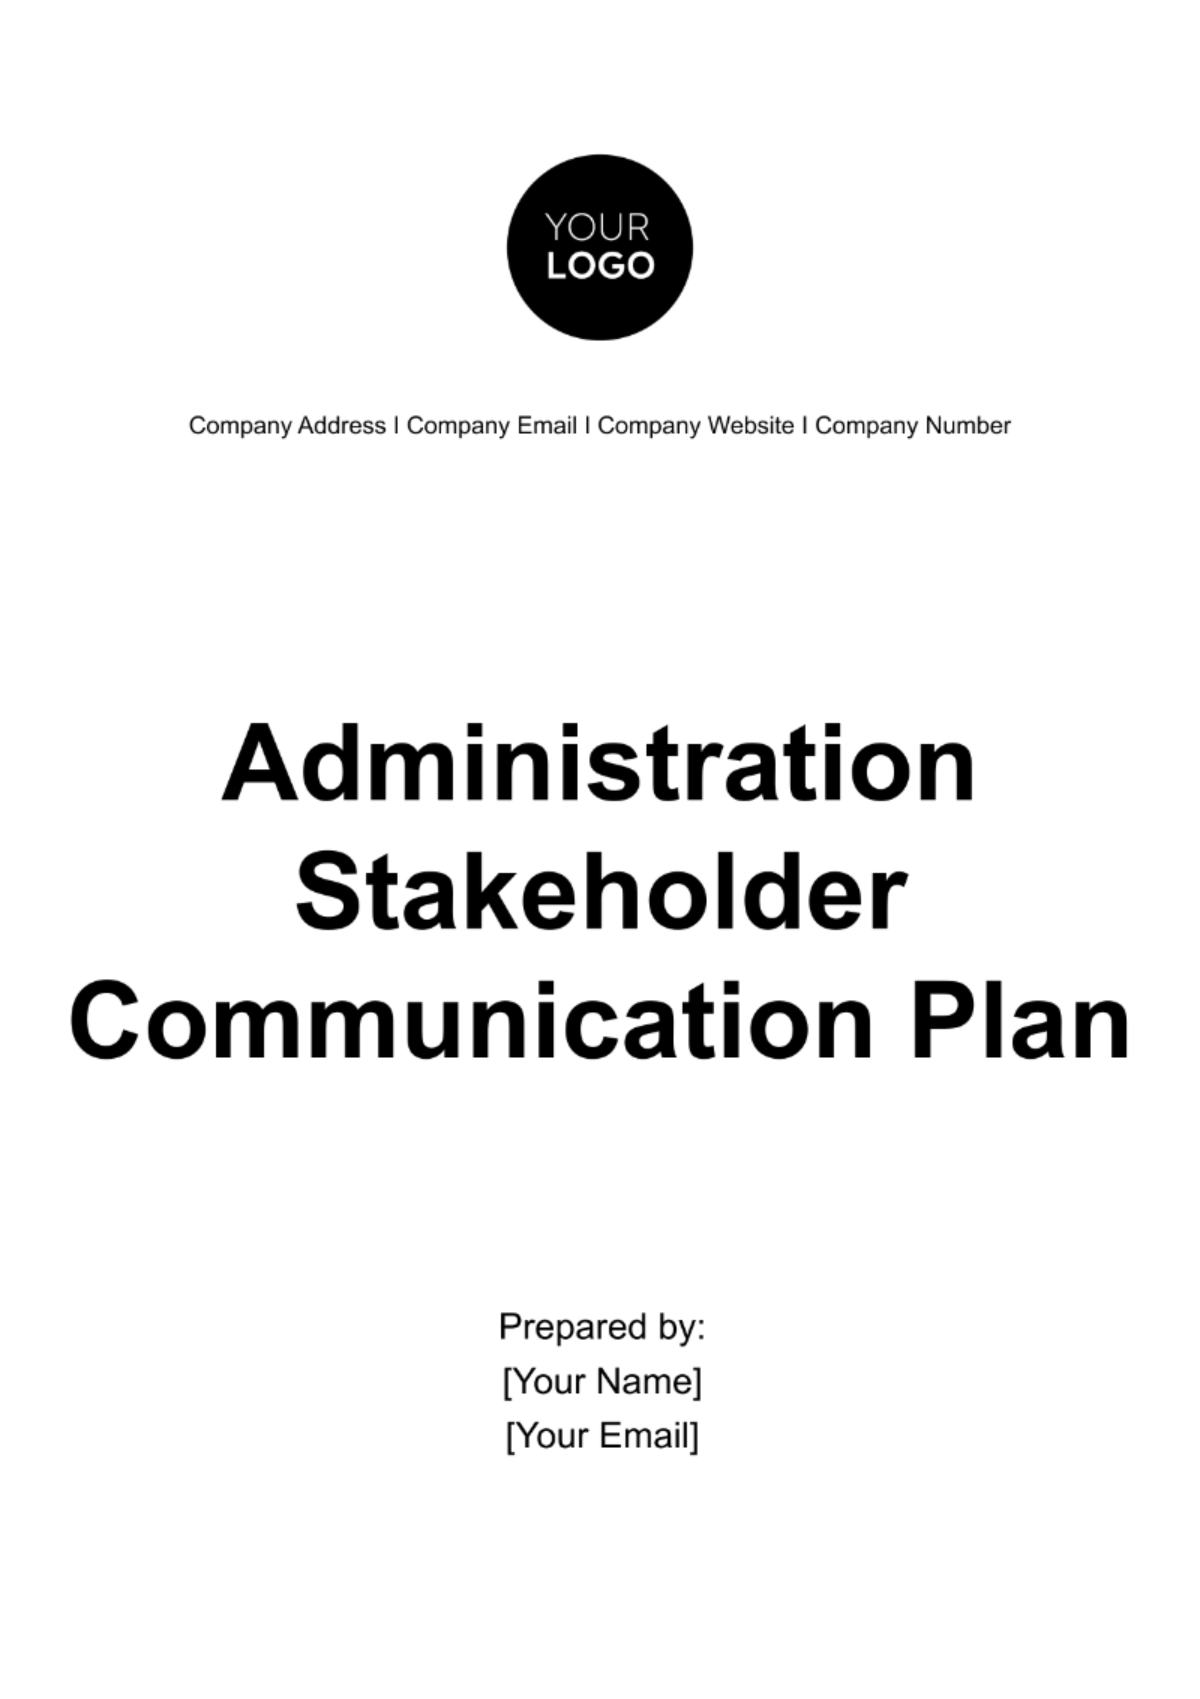 Administration Stakeholder Communication Plan Template